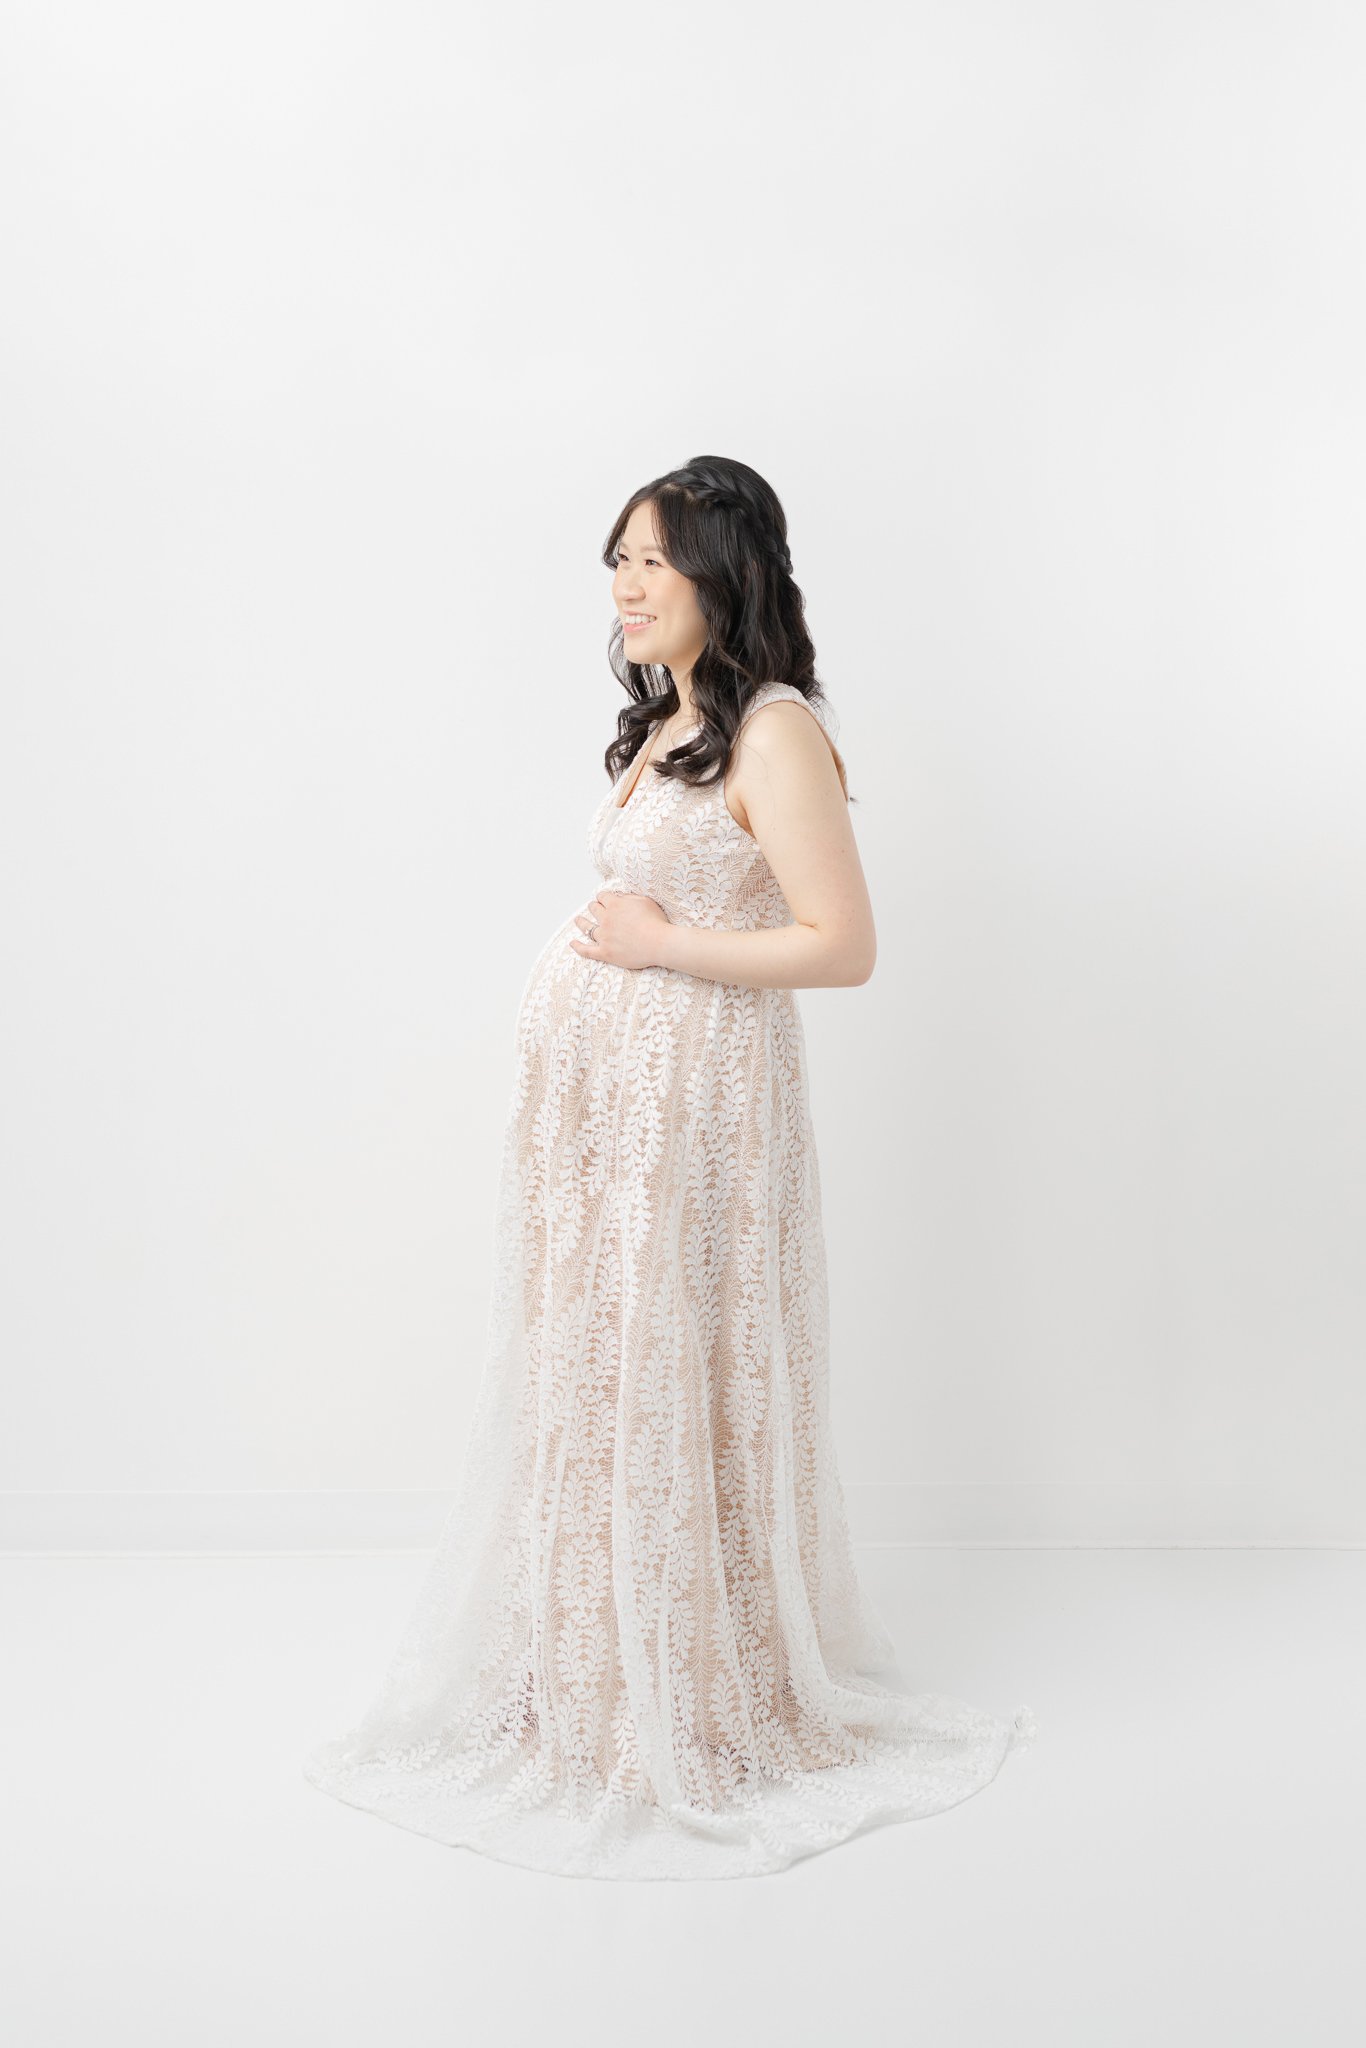  The side profile maternity portrait was taken at a New Jersey studio by Nicole Hawkins Photography. side maternity portrait Asian maternity #NicoleHawkinsPhotography #NicoleHawkinsMaternity #MaternityPhotography #Maternitystyle #NJMaternity #Timeles